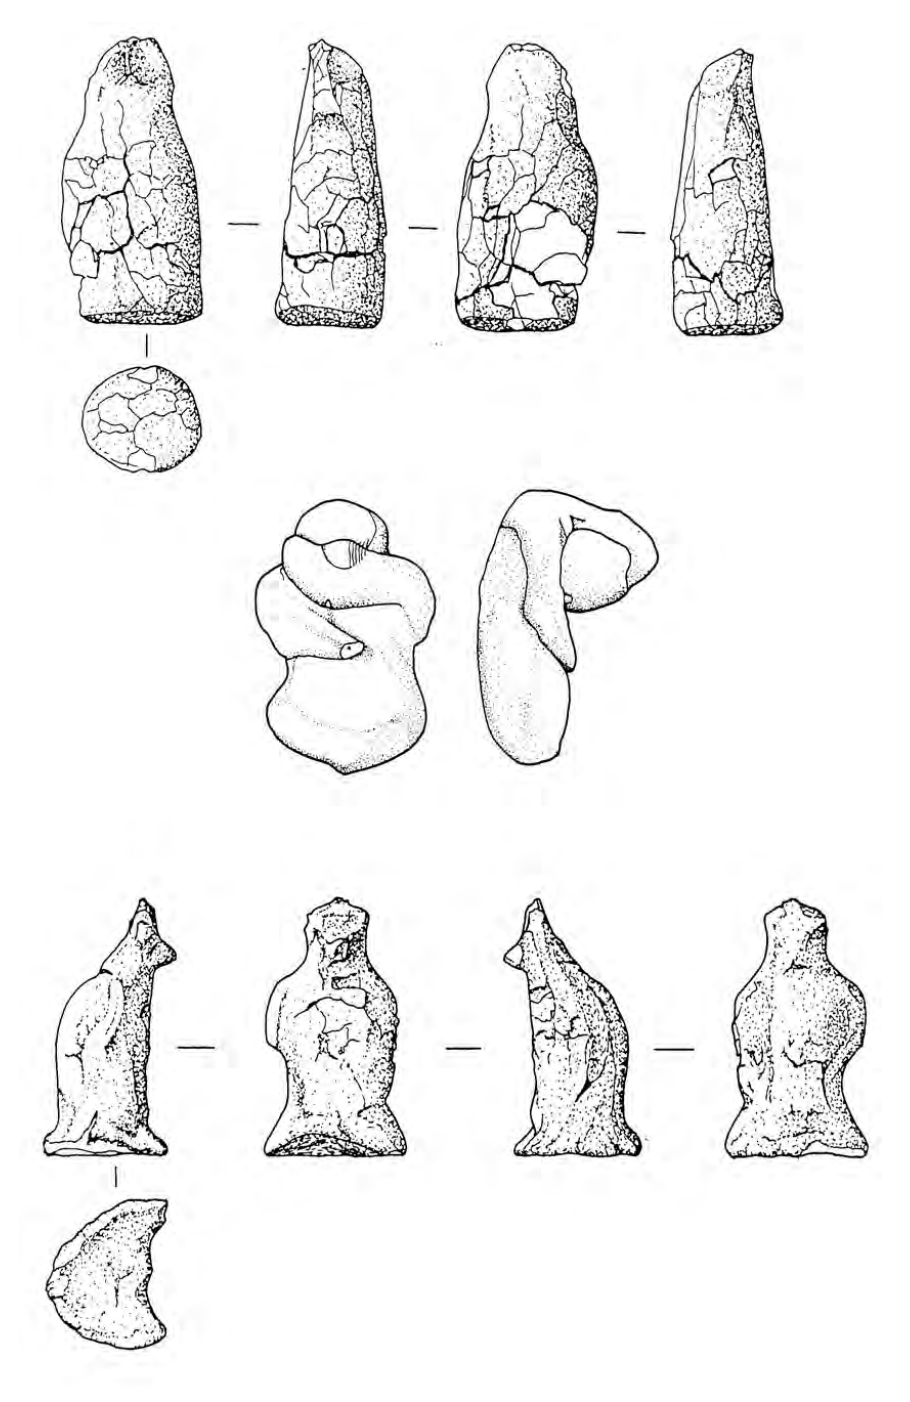 drawings of several figurines from different angles